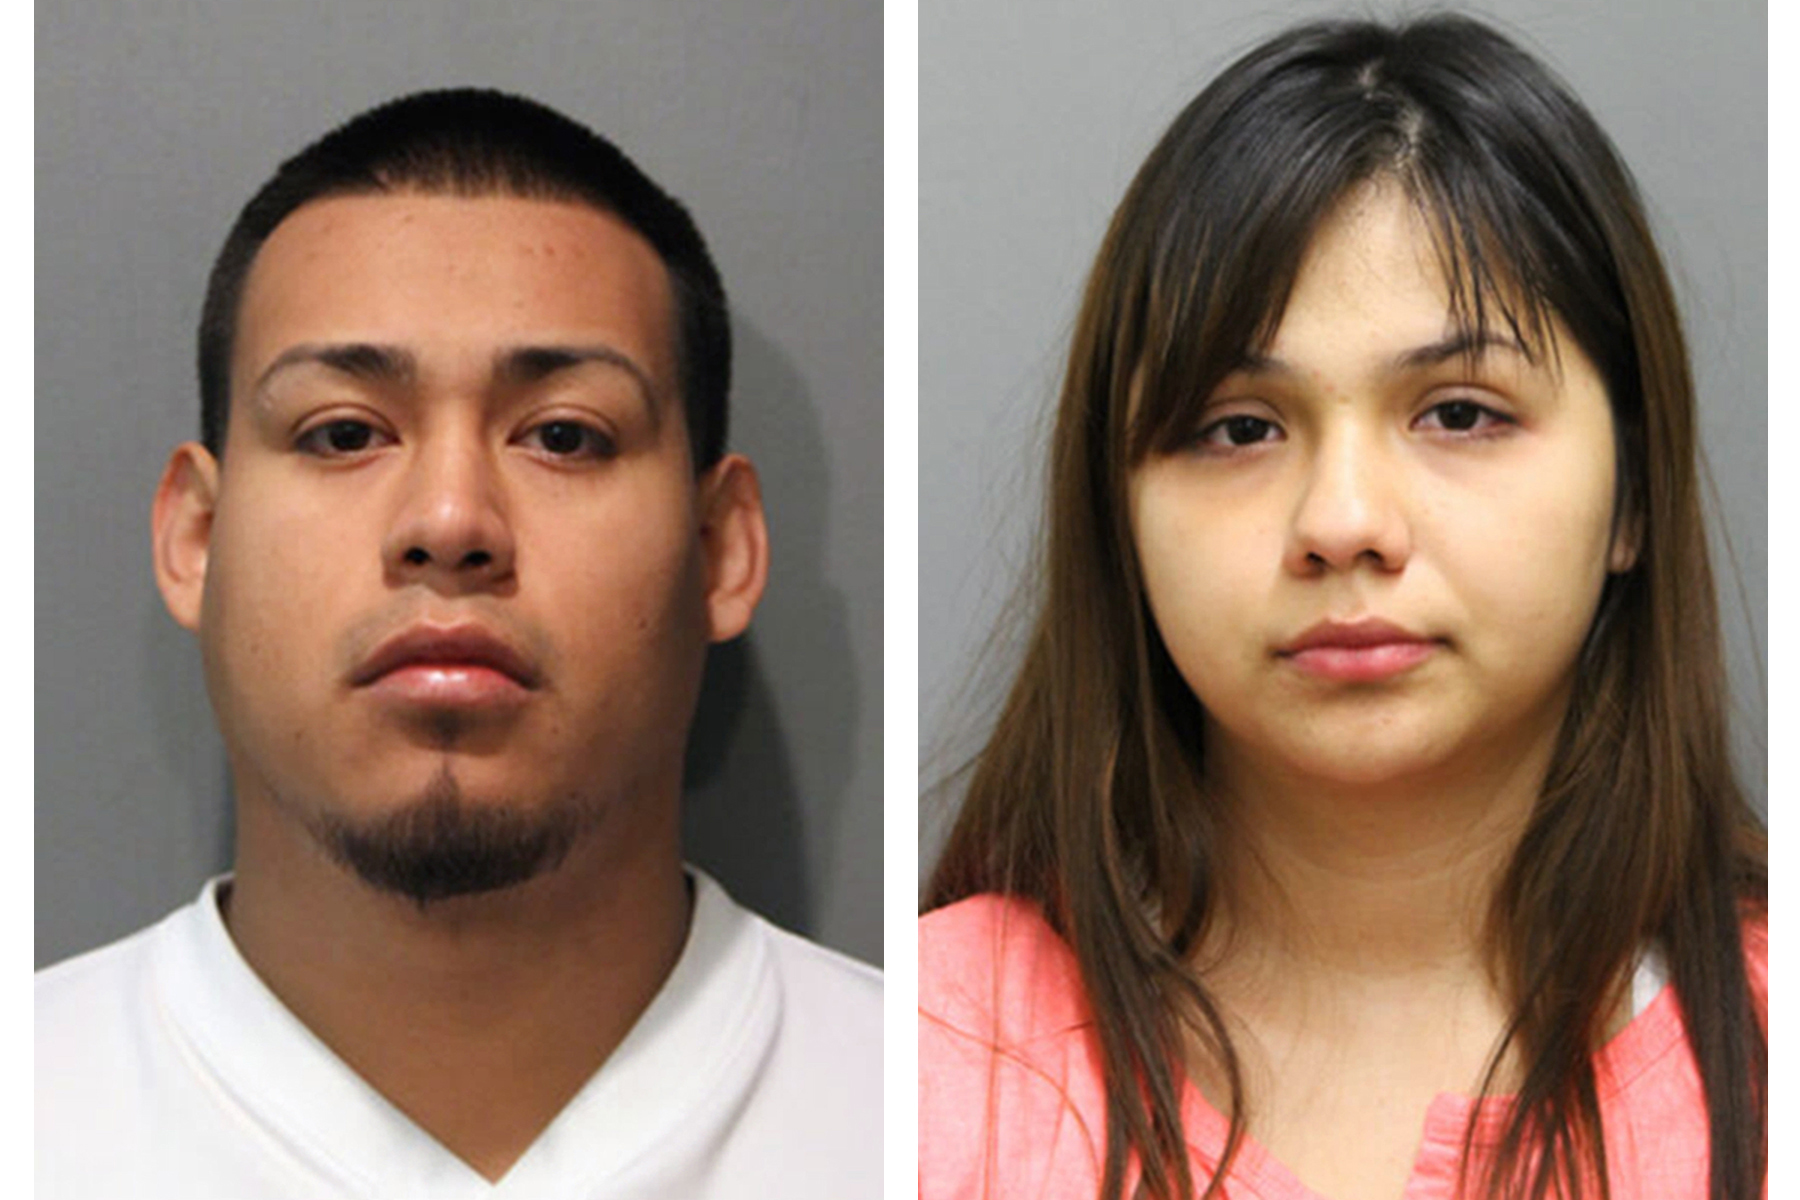 This combination of booking photos provided by the Chicago Police Department on Thursday, May 19, 2016 shows Diego Uribe Cruz and his girlfriend, Jafeth Ramos, who were arrested Thursday and charged with six counts of first-degree murder in the killings of six members of a family in Chicago's Gage Park neighborhood.